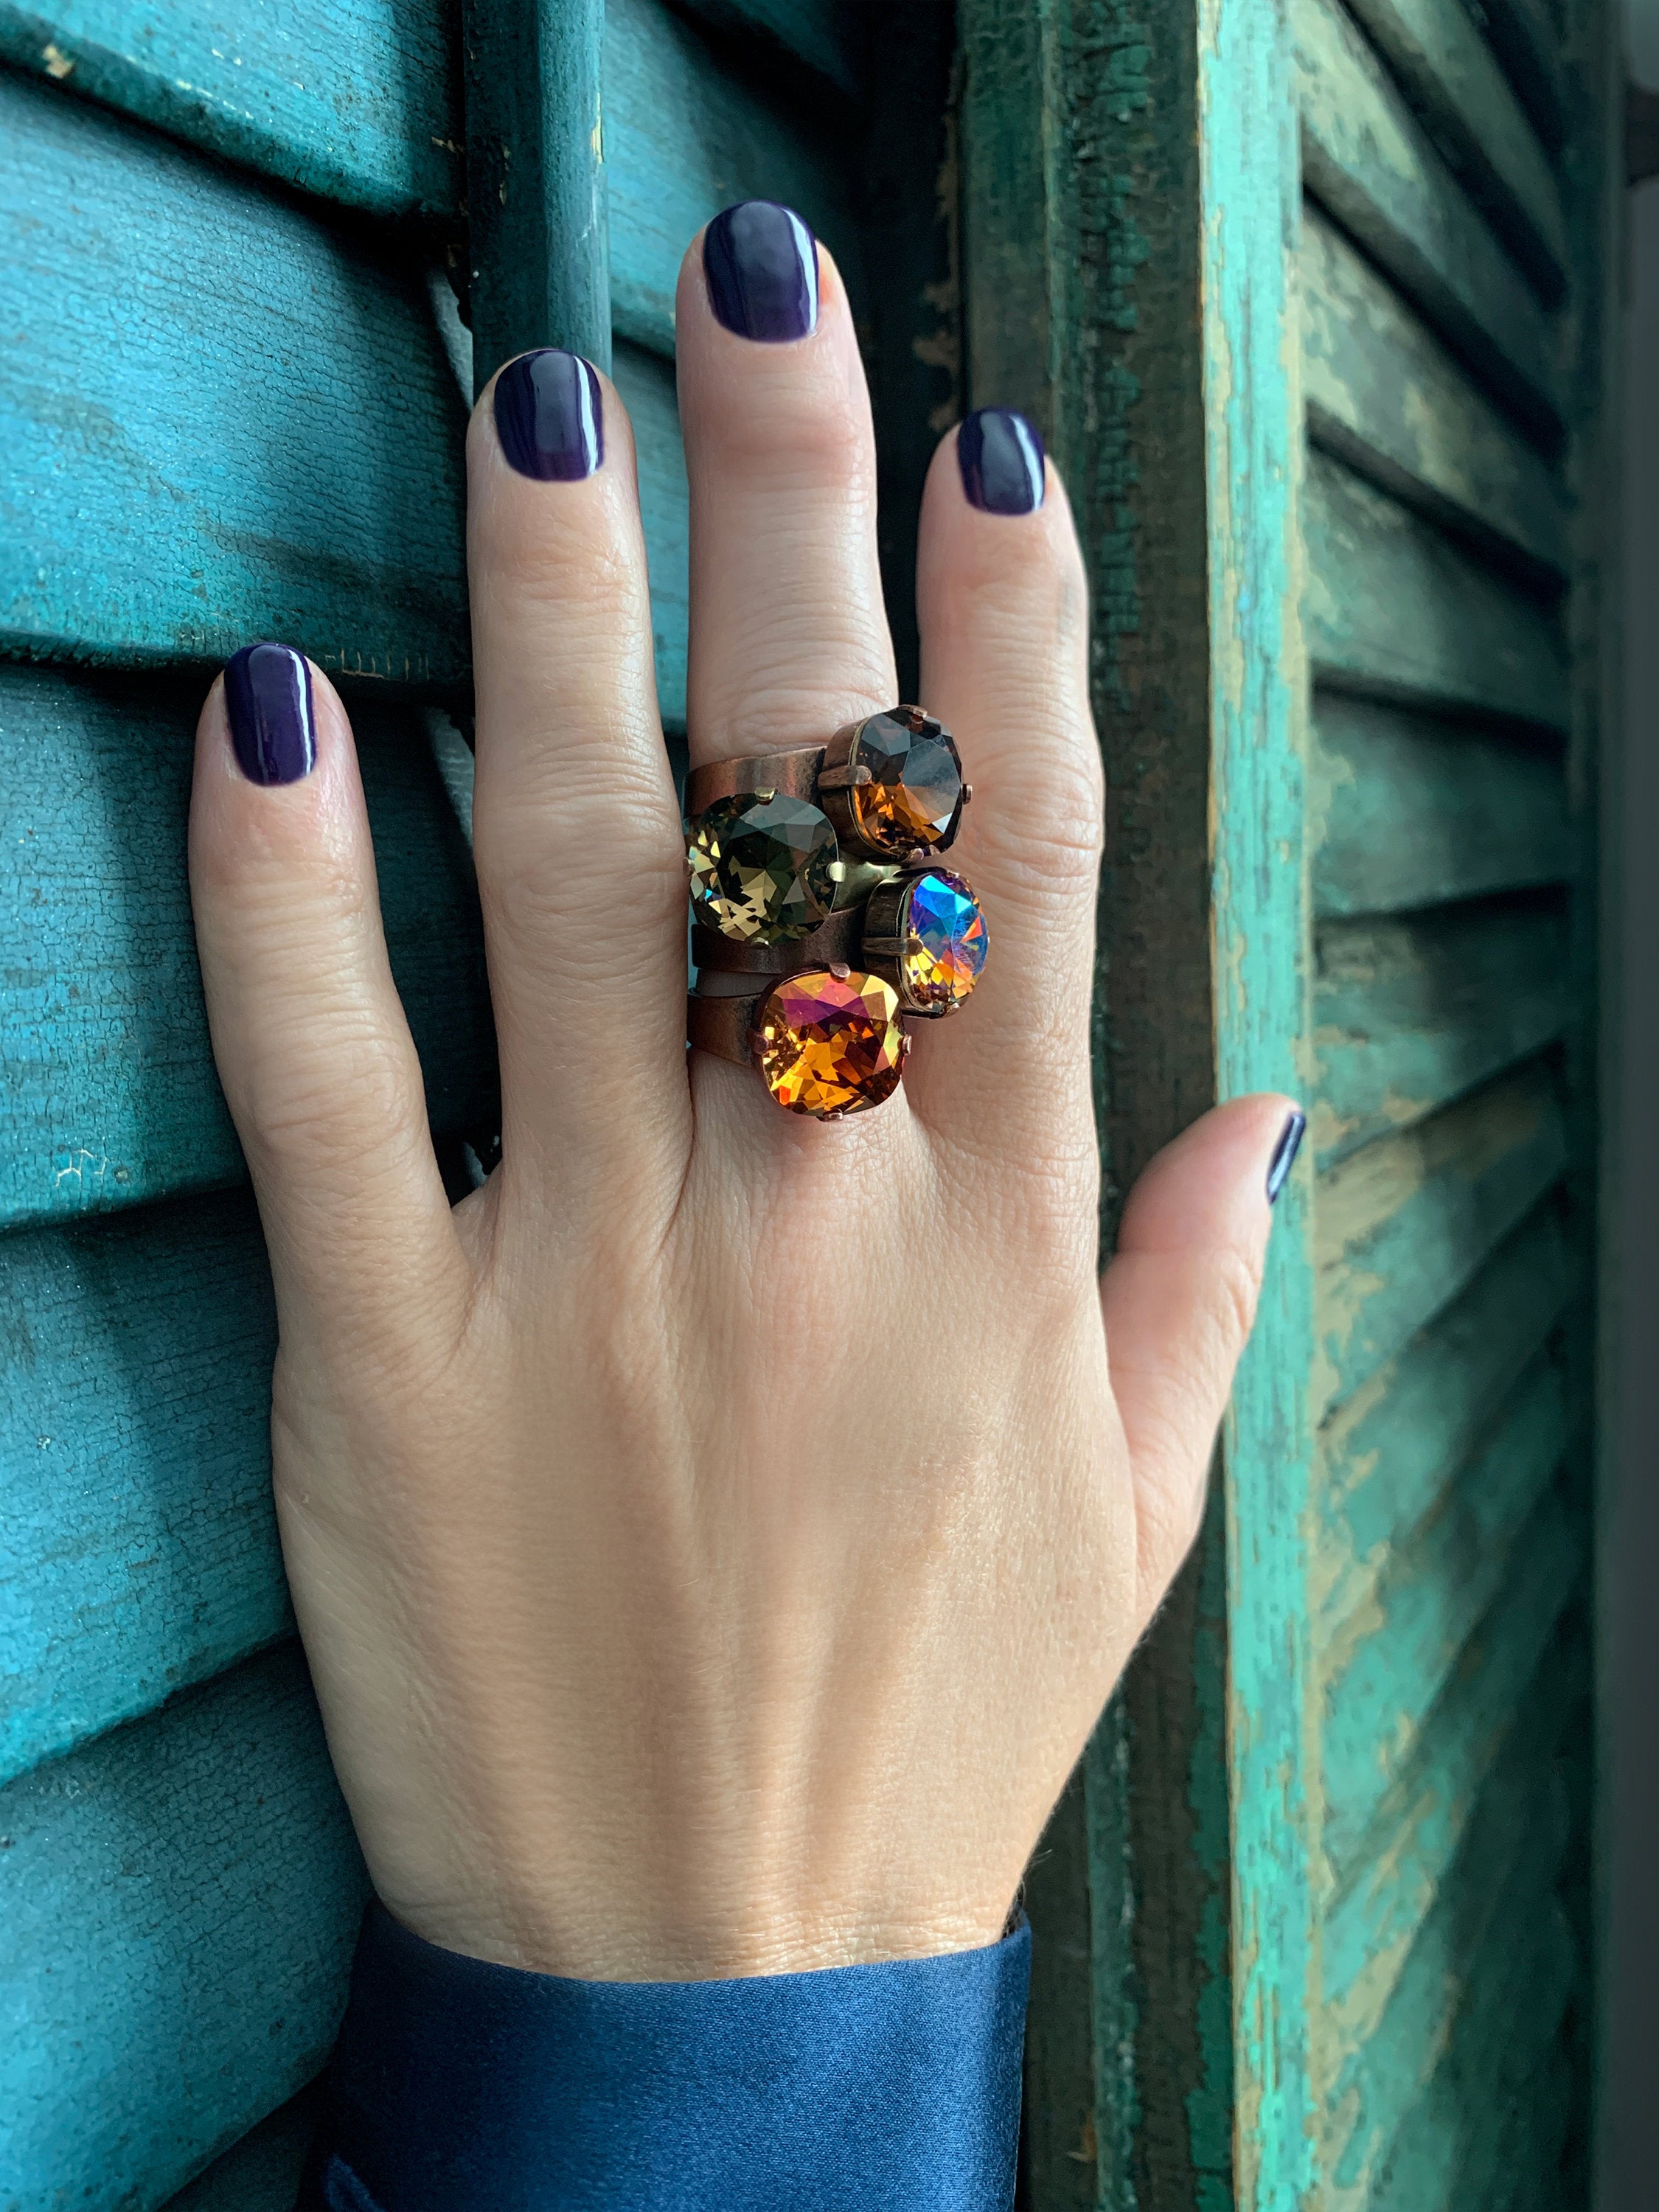 OF THE EARTH - Smoky Quartz and Dark Topaz Color Crystal Rings